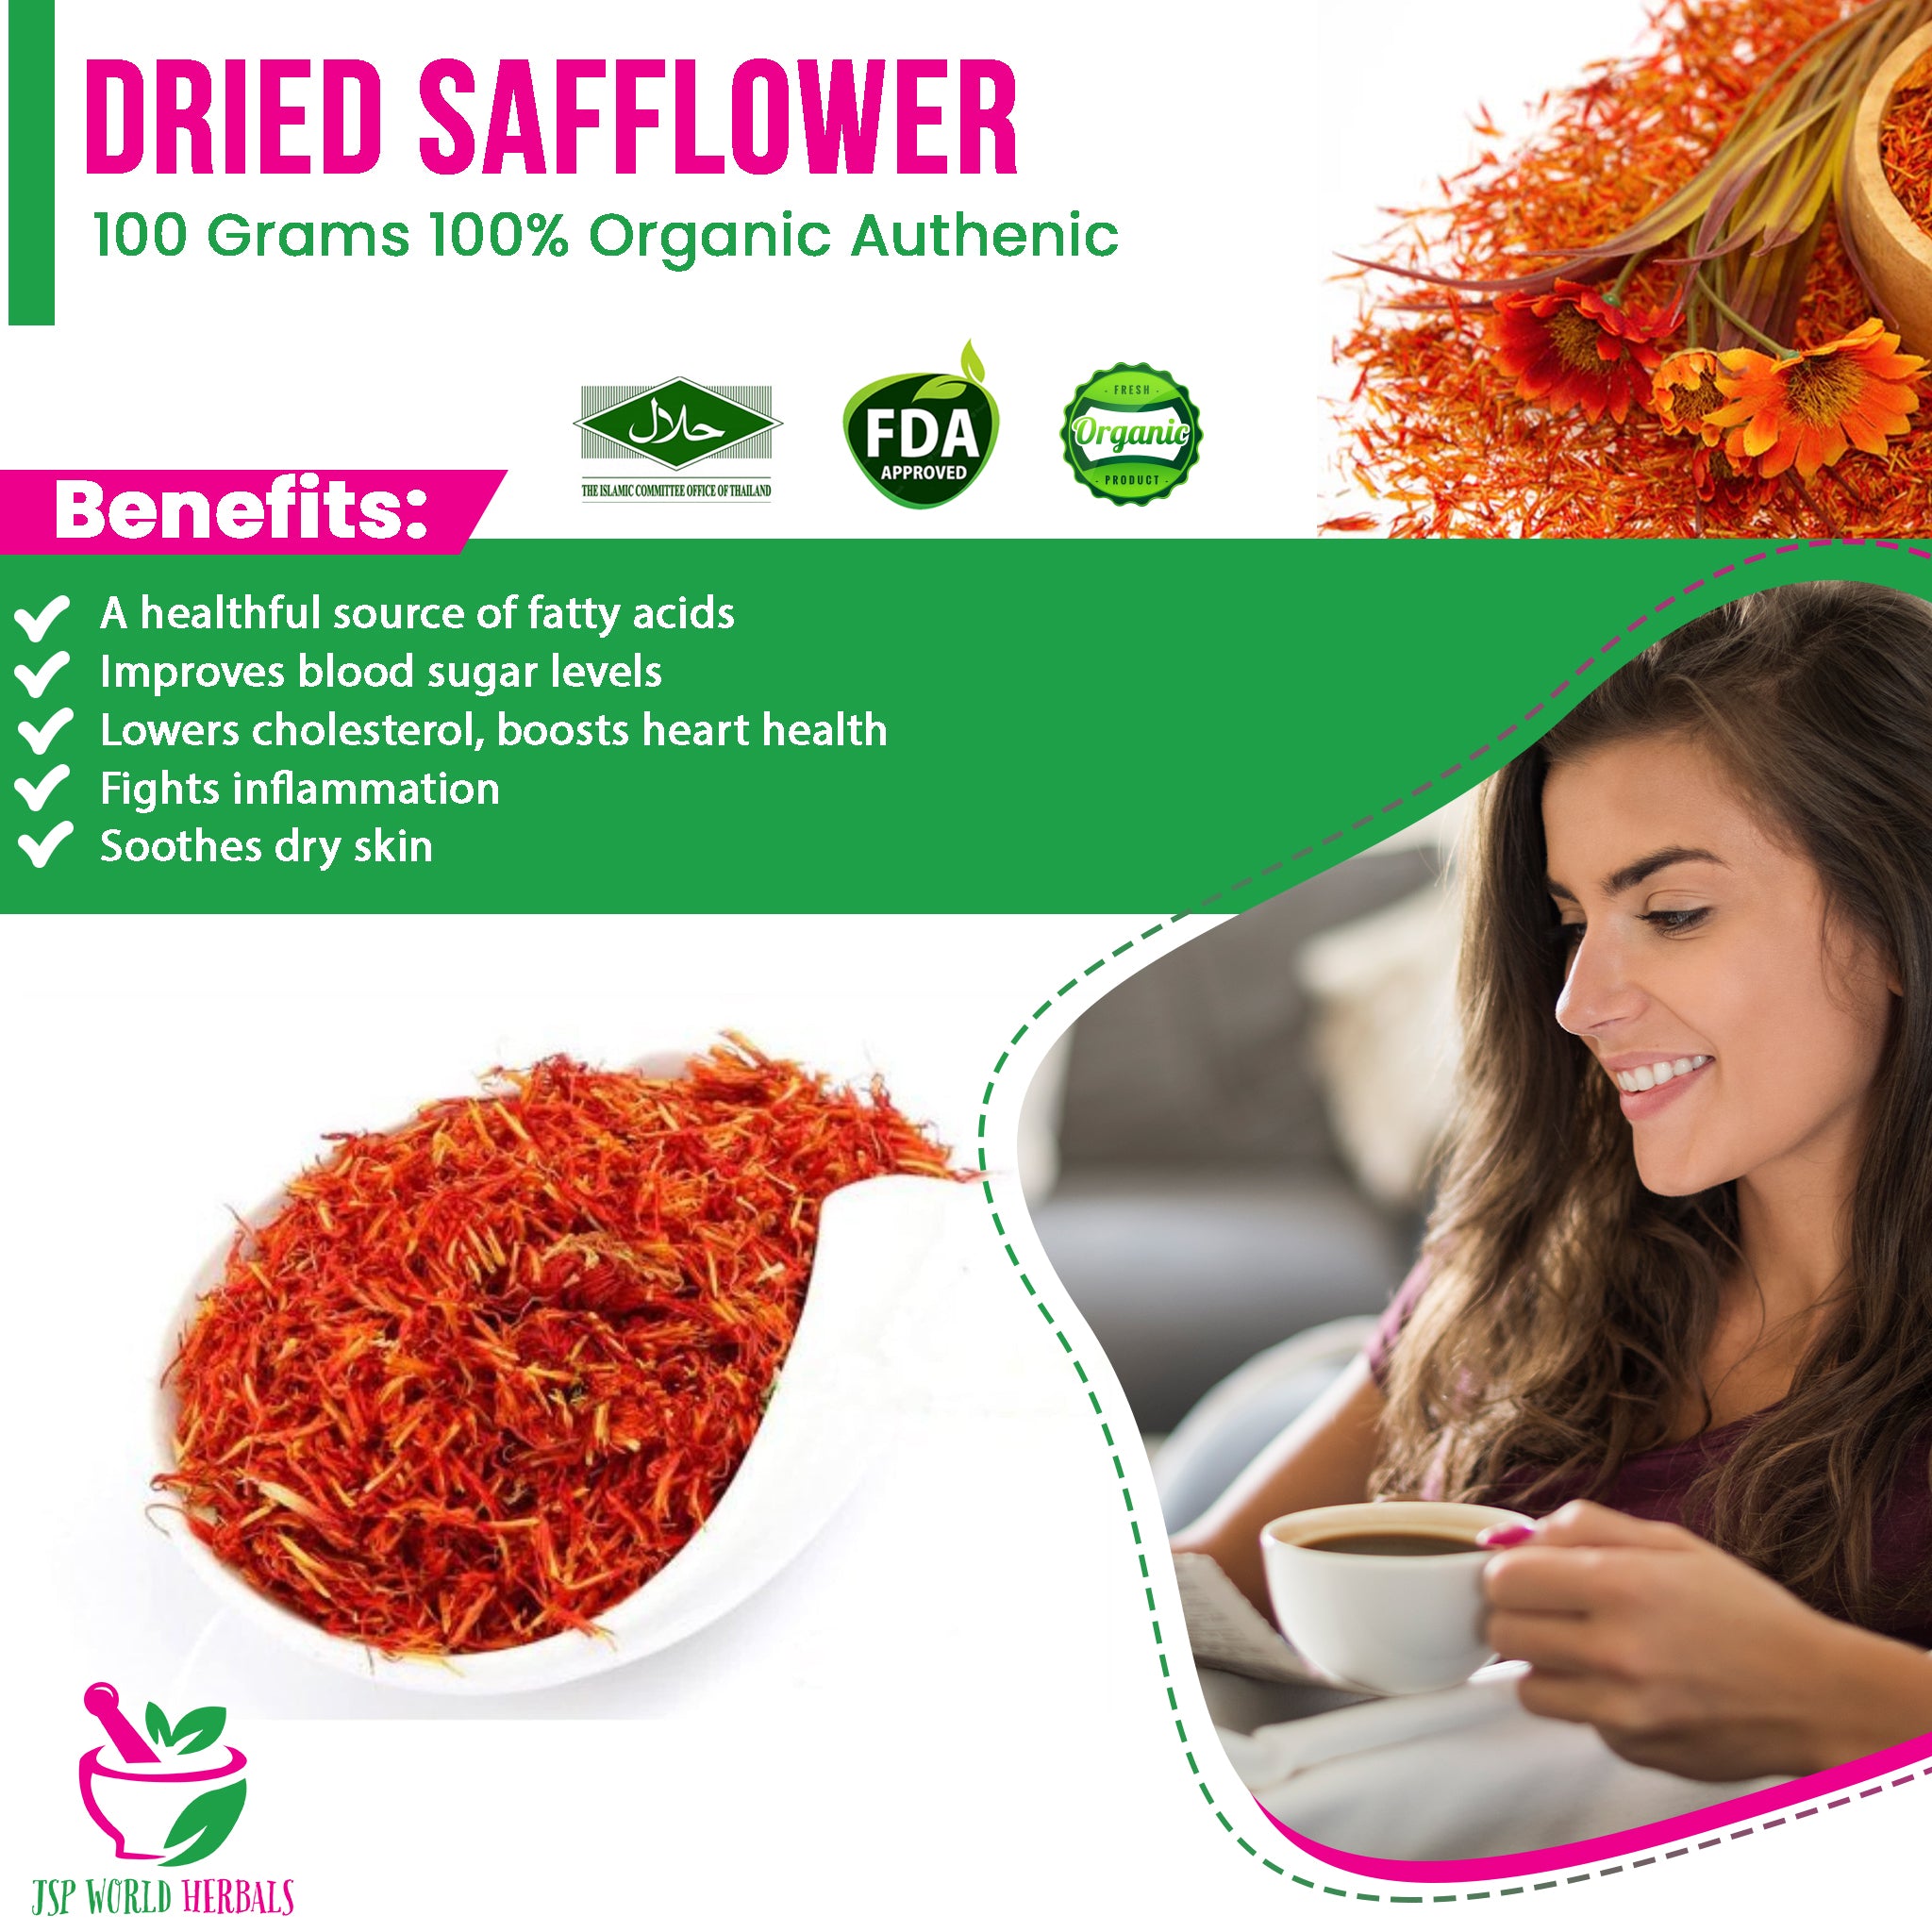 Dried Safflower, widen blood vessels, lower blood pressure, and stimulate the heart. 